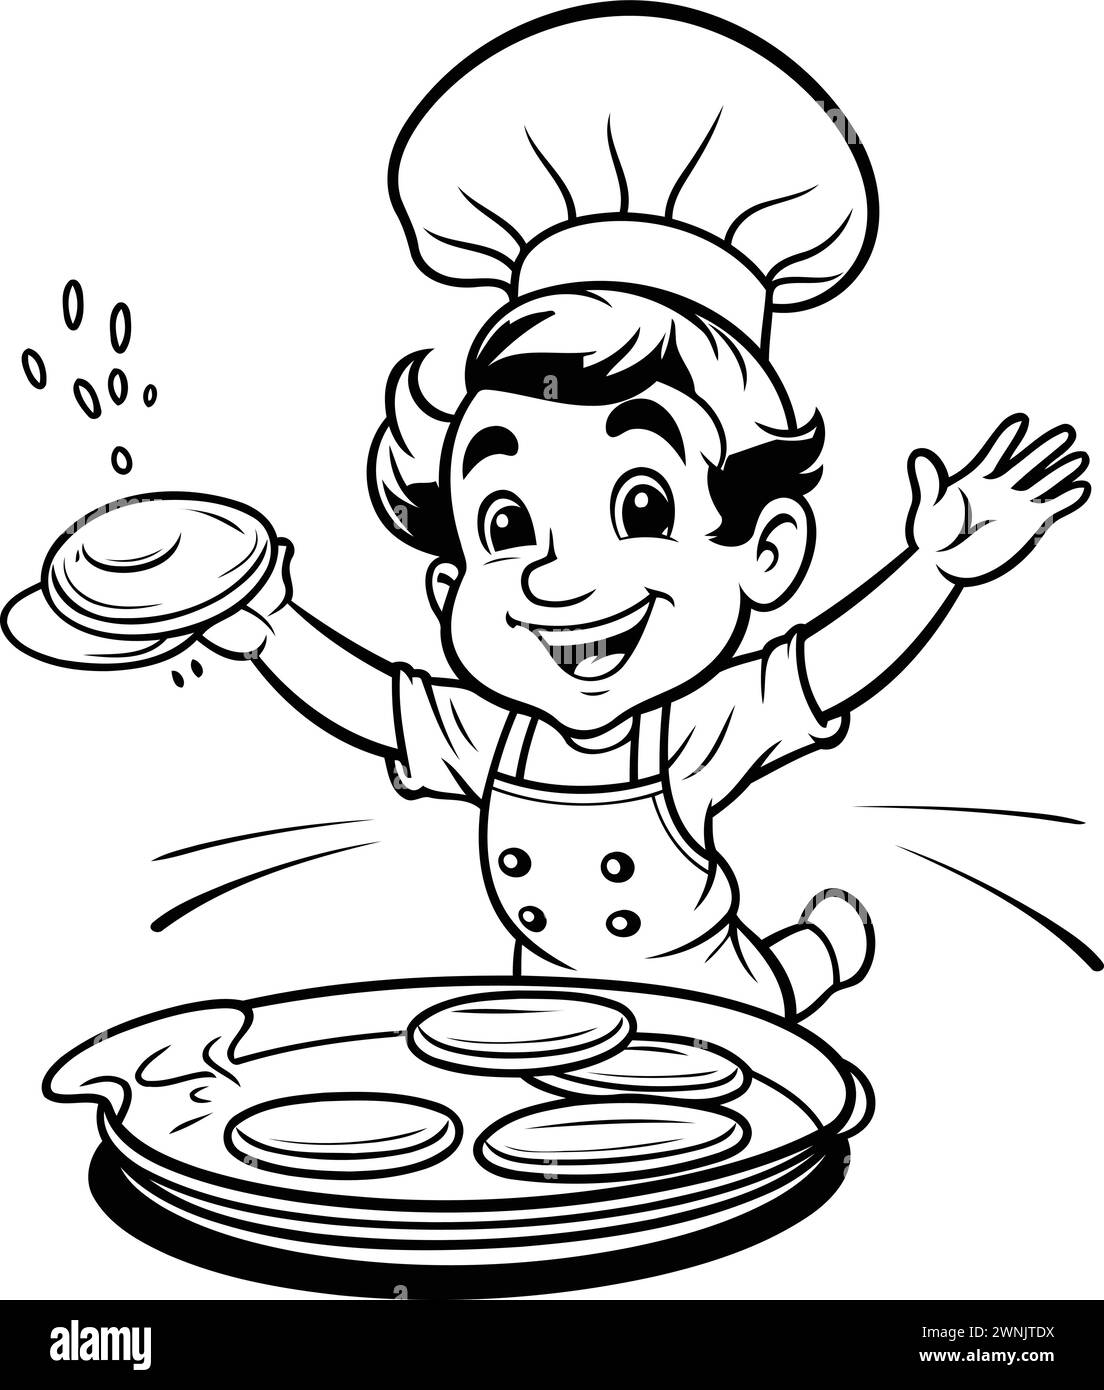 Black and White Cartoon Illustration of Little Boy Chef Cooking Pancakes for Coloring Book Stock Vector